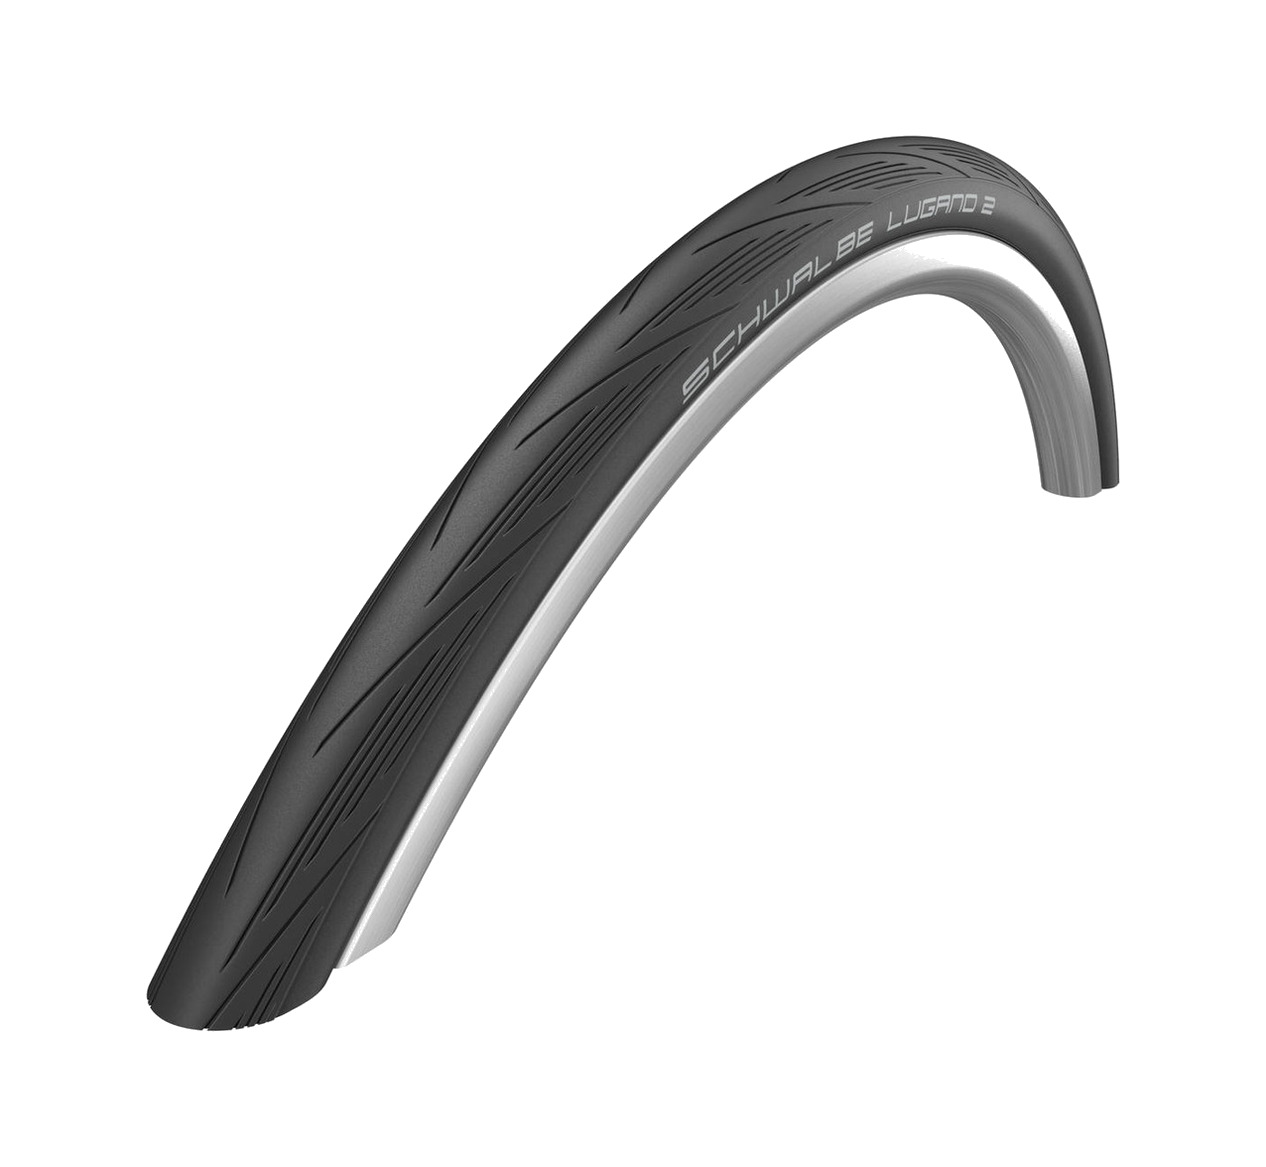 Rigid tire for bicycle LUGANO II 700x32C HS471 ACTIVE LINE K-GUARD SIC 32-622 - Picture 1 of 1